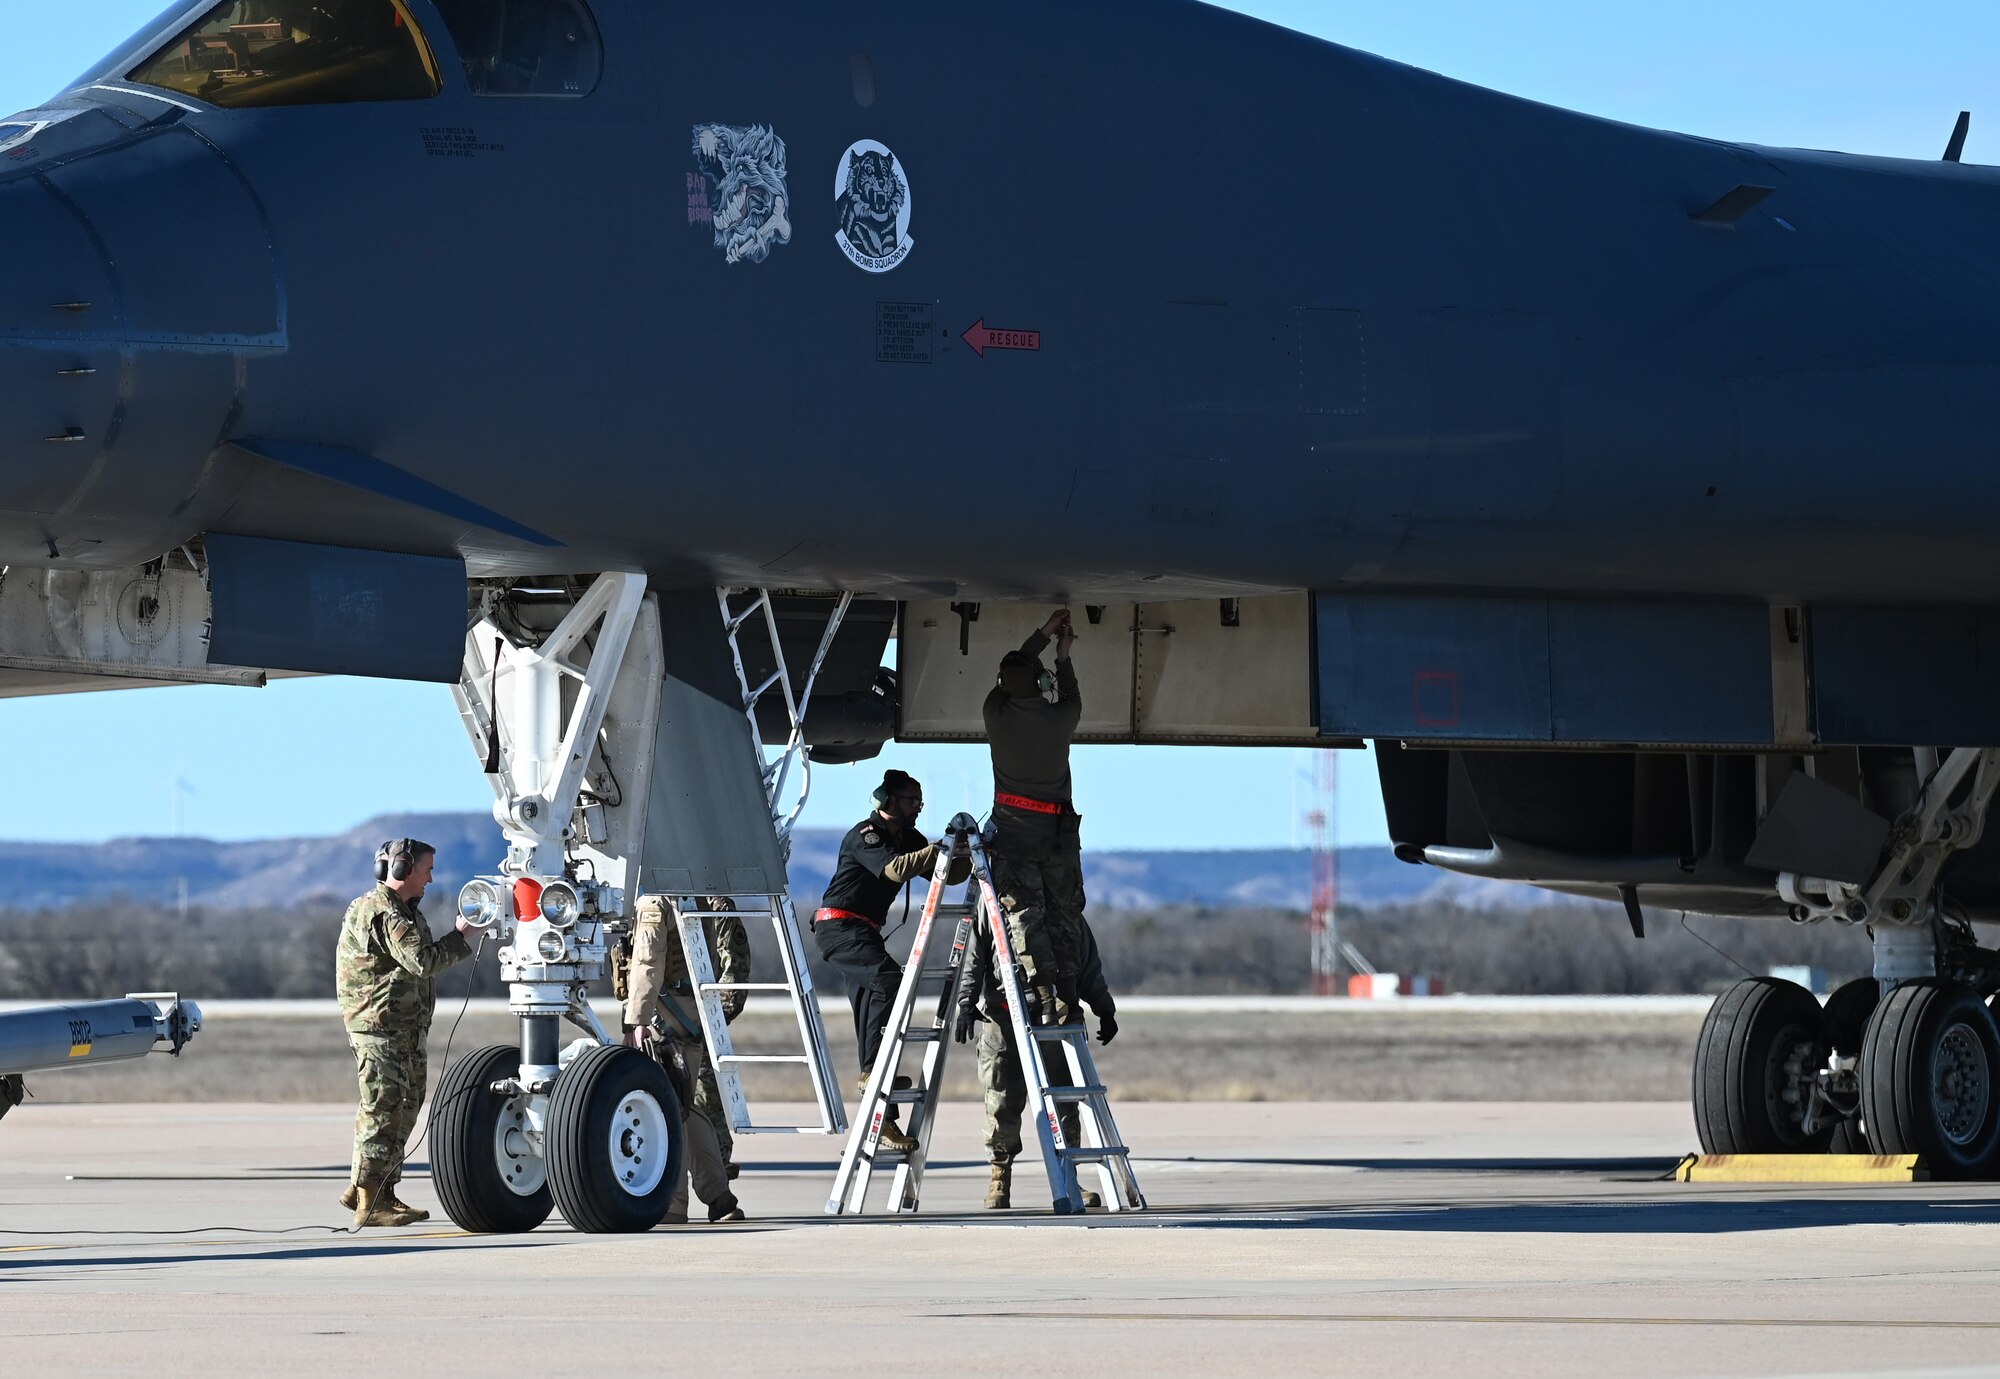 Airmen from the 28th Maintenance Group, Ellsworth Air Force Base, South Dakota, perform postflight checks on an Ellsworth AFB B-1B Lancer while 7th Bomb Wing leadership greet crewmembers on the flightline at Dyess AFB, Texas, Feb. 3, 2024. (U.S. Air Force photo by Staff Sgt. Holly Cook)